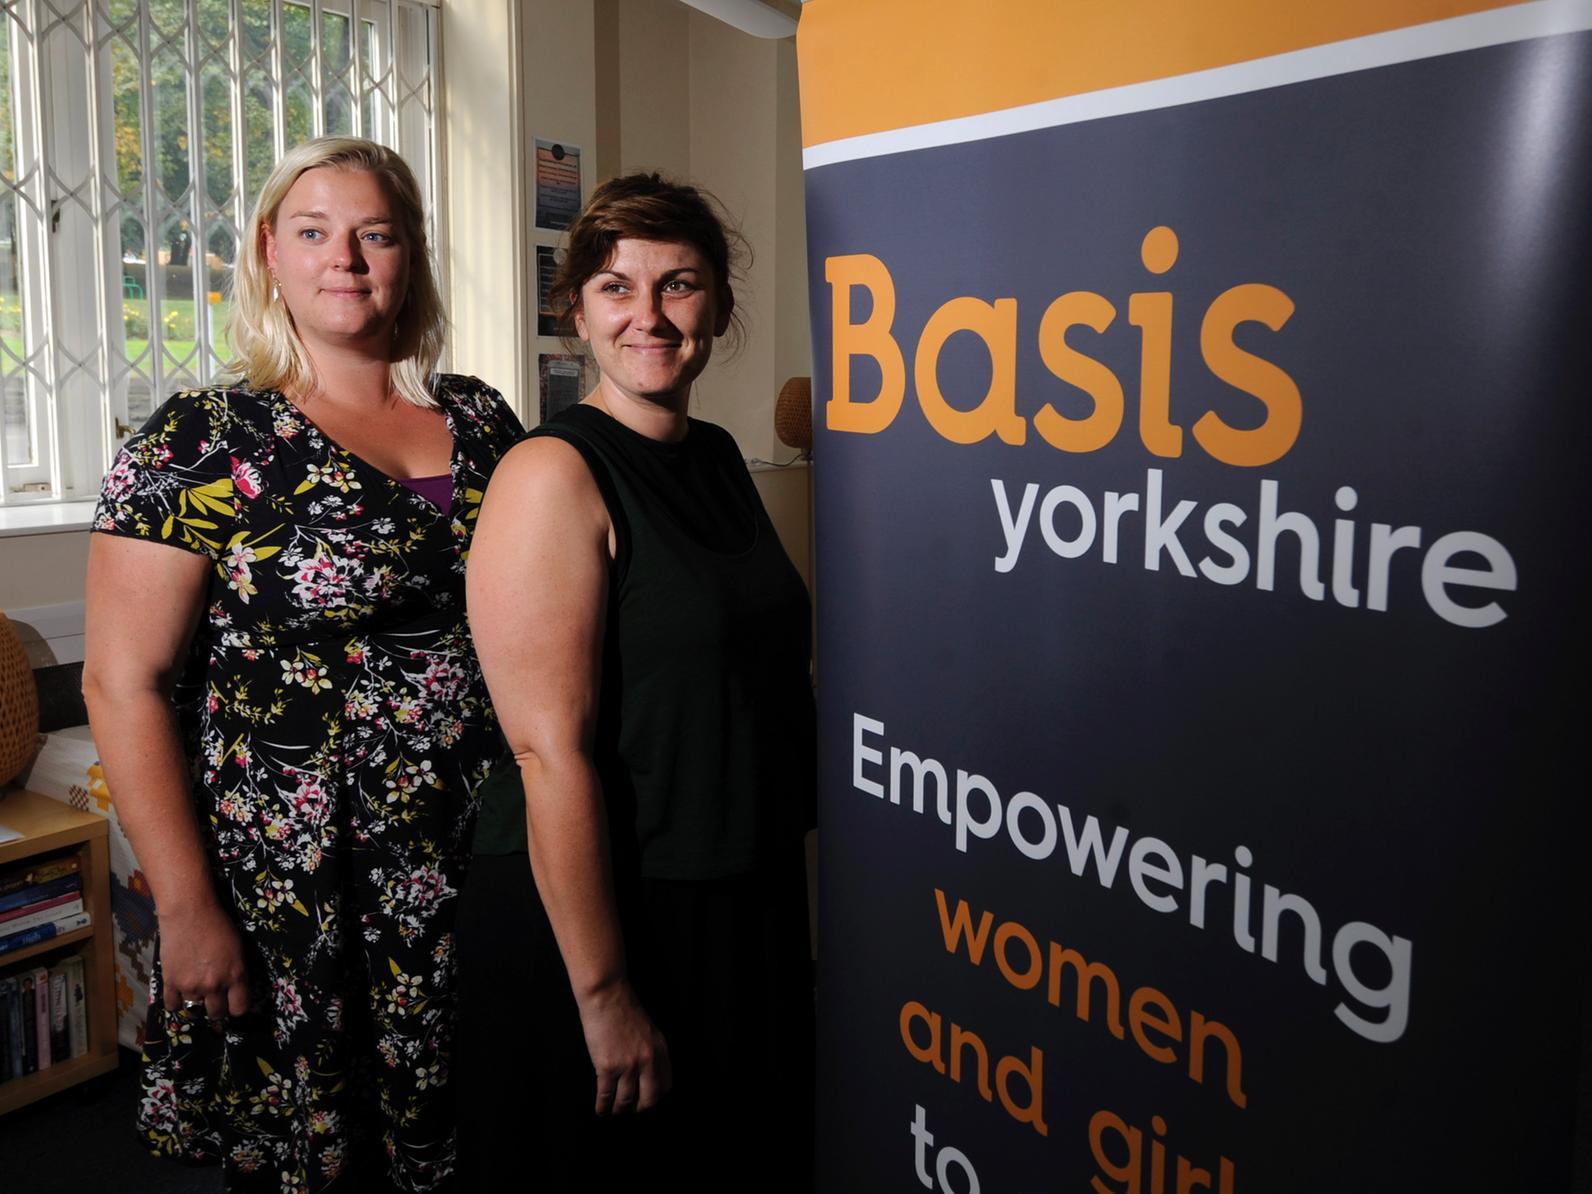 Leeds-based Basis Yorkshire is one of the charities to benefit from the increase in funding for victims of sexual violence. Pictured are Taylor Austin-Little (left) and Jo Hall.